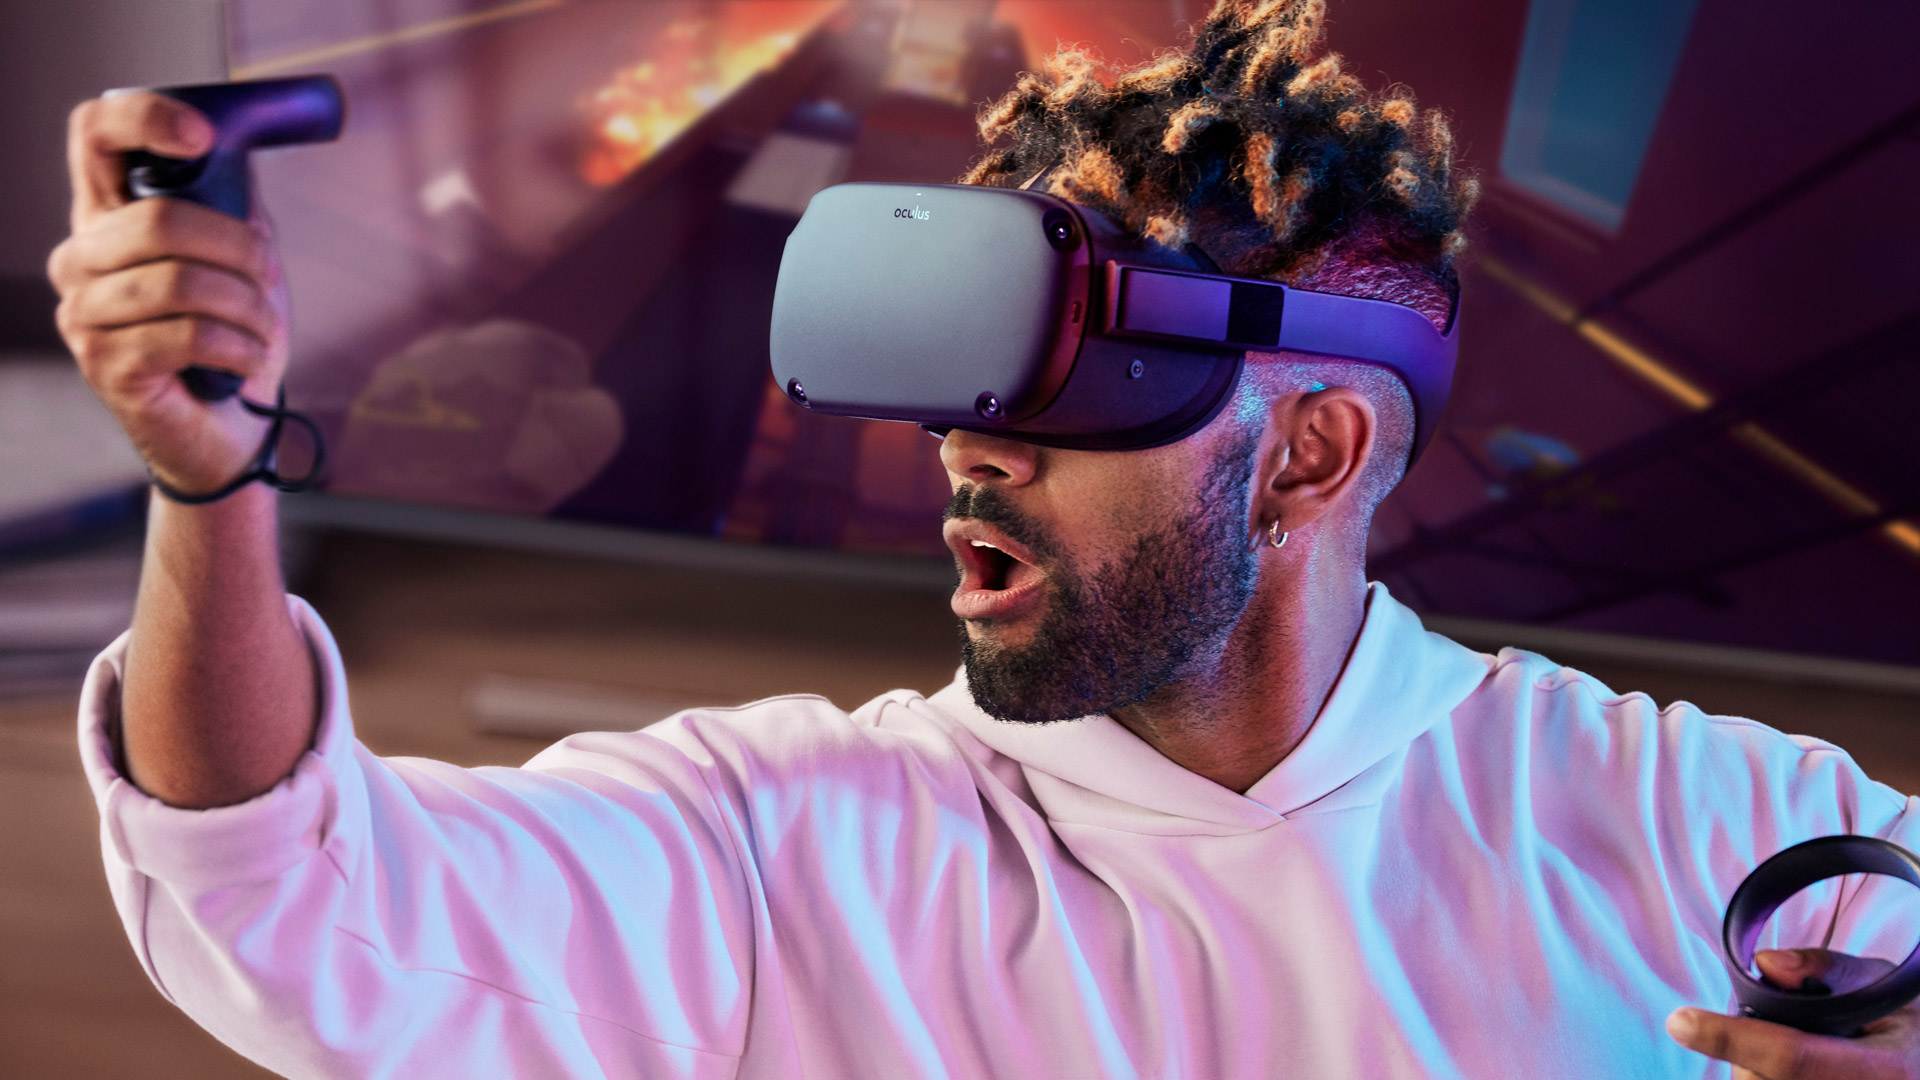 most successful vr games